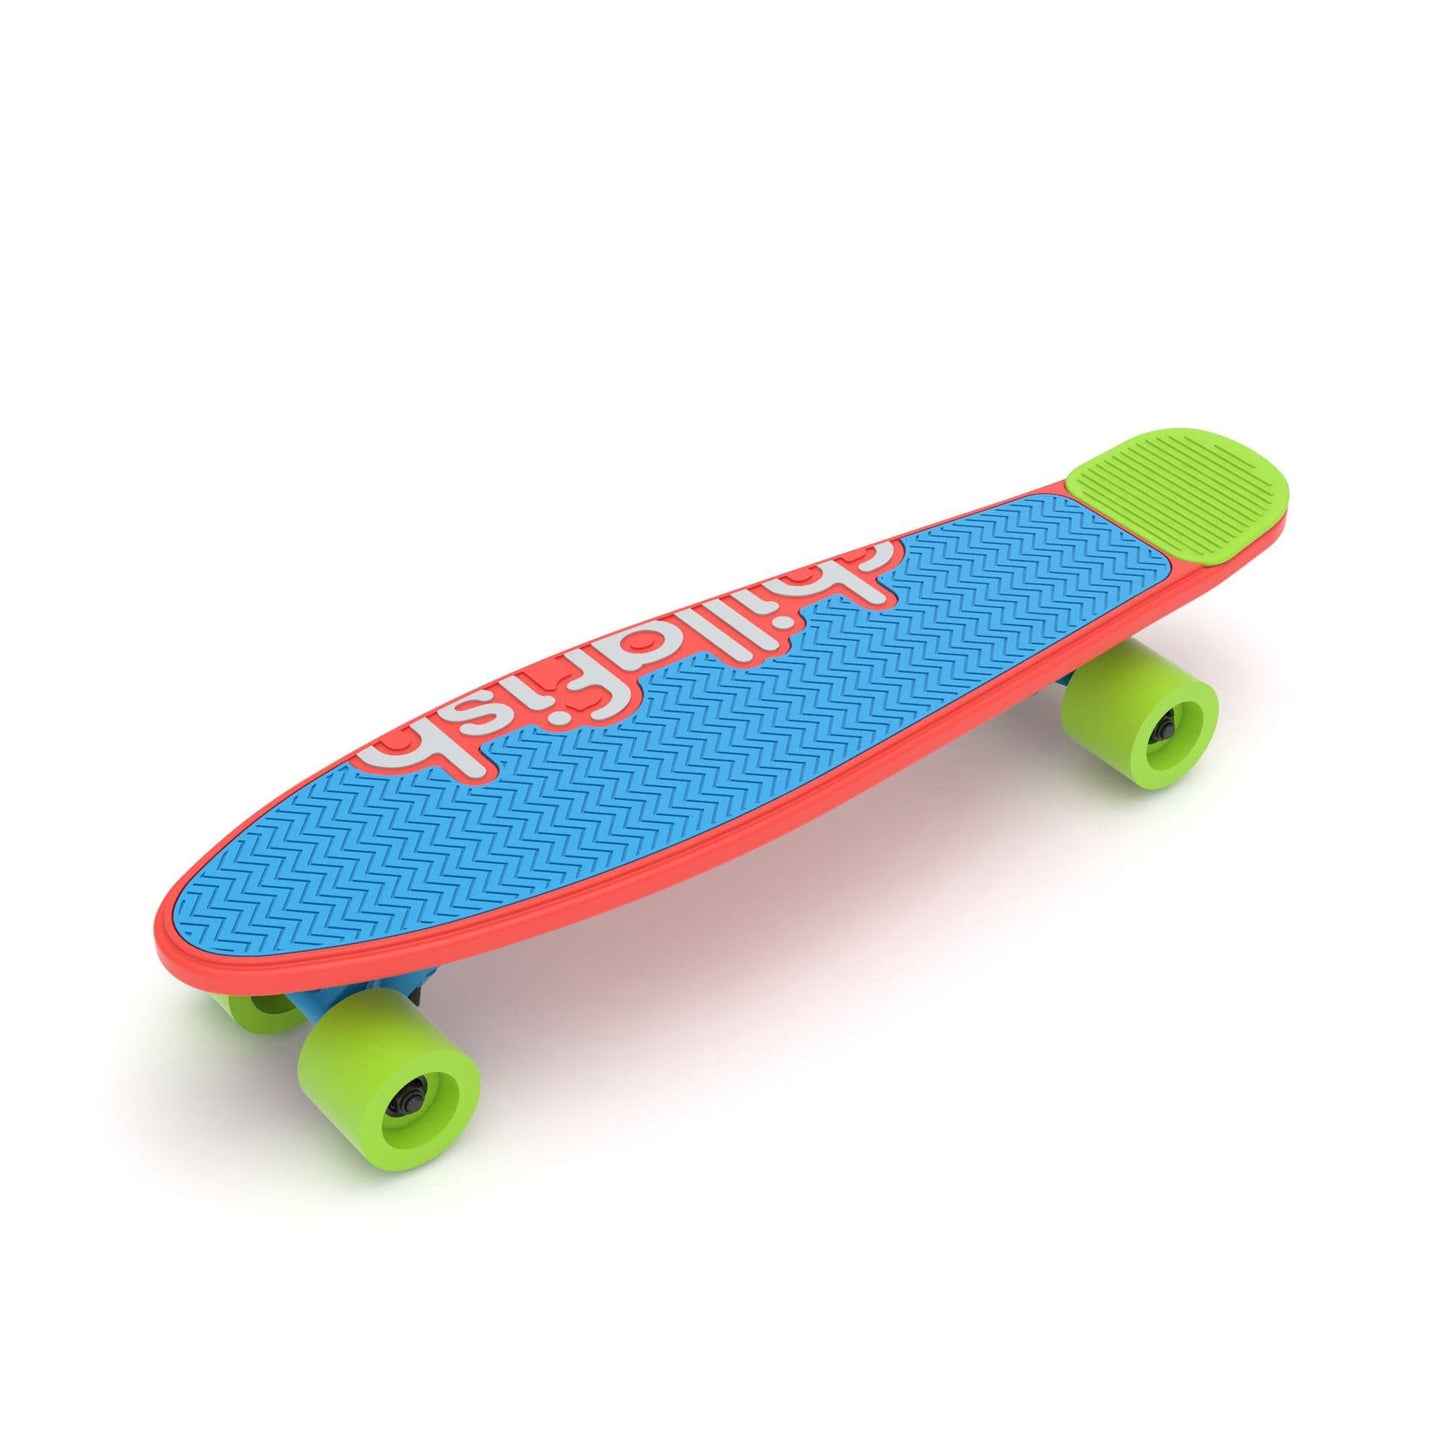 Chillafish Skatie Skateboard Red Mix Age 3+ - The Online Toy Shop3